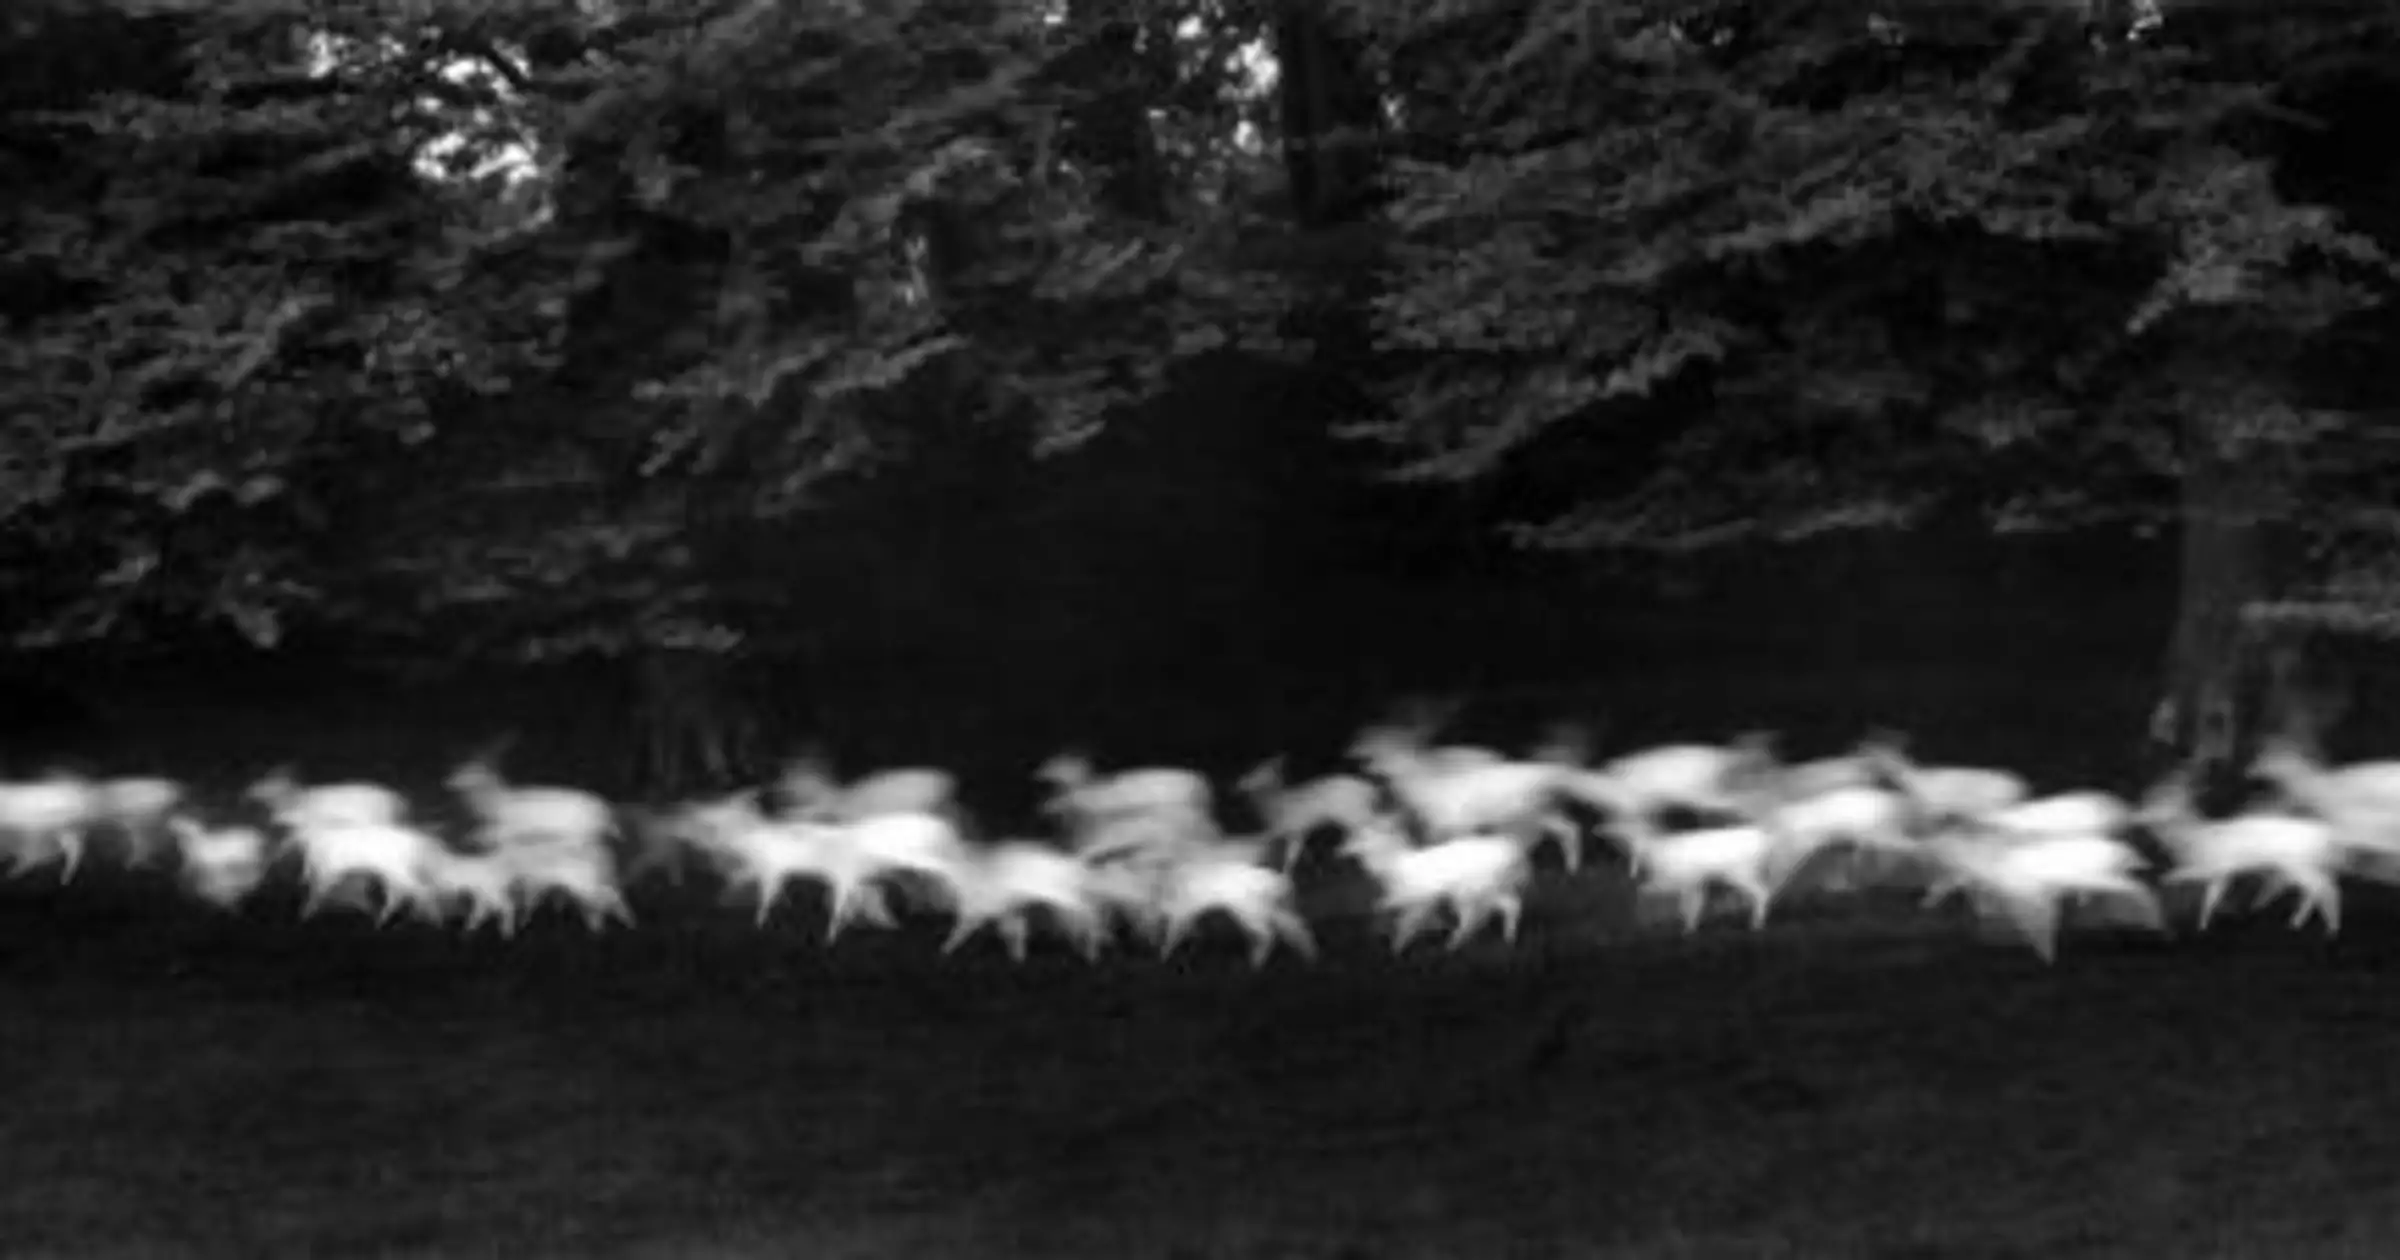 Paul Caponigro, Running White Deer, Catherine Couturier Gallery